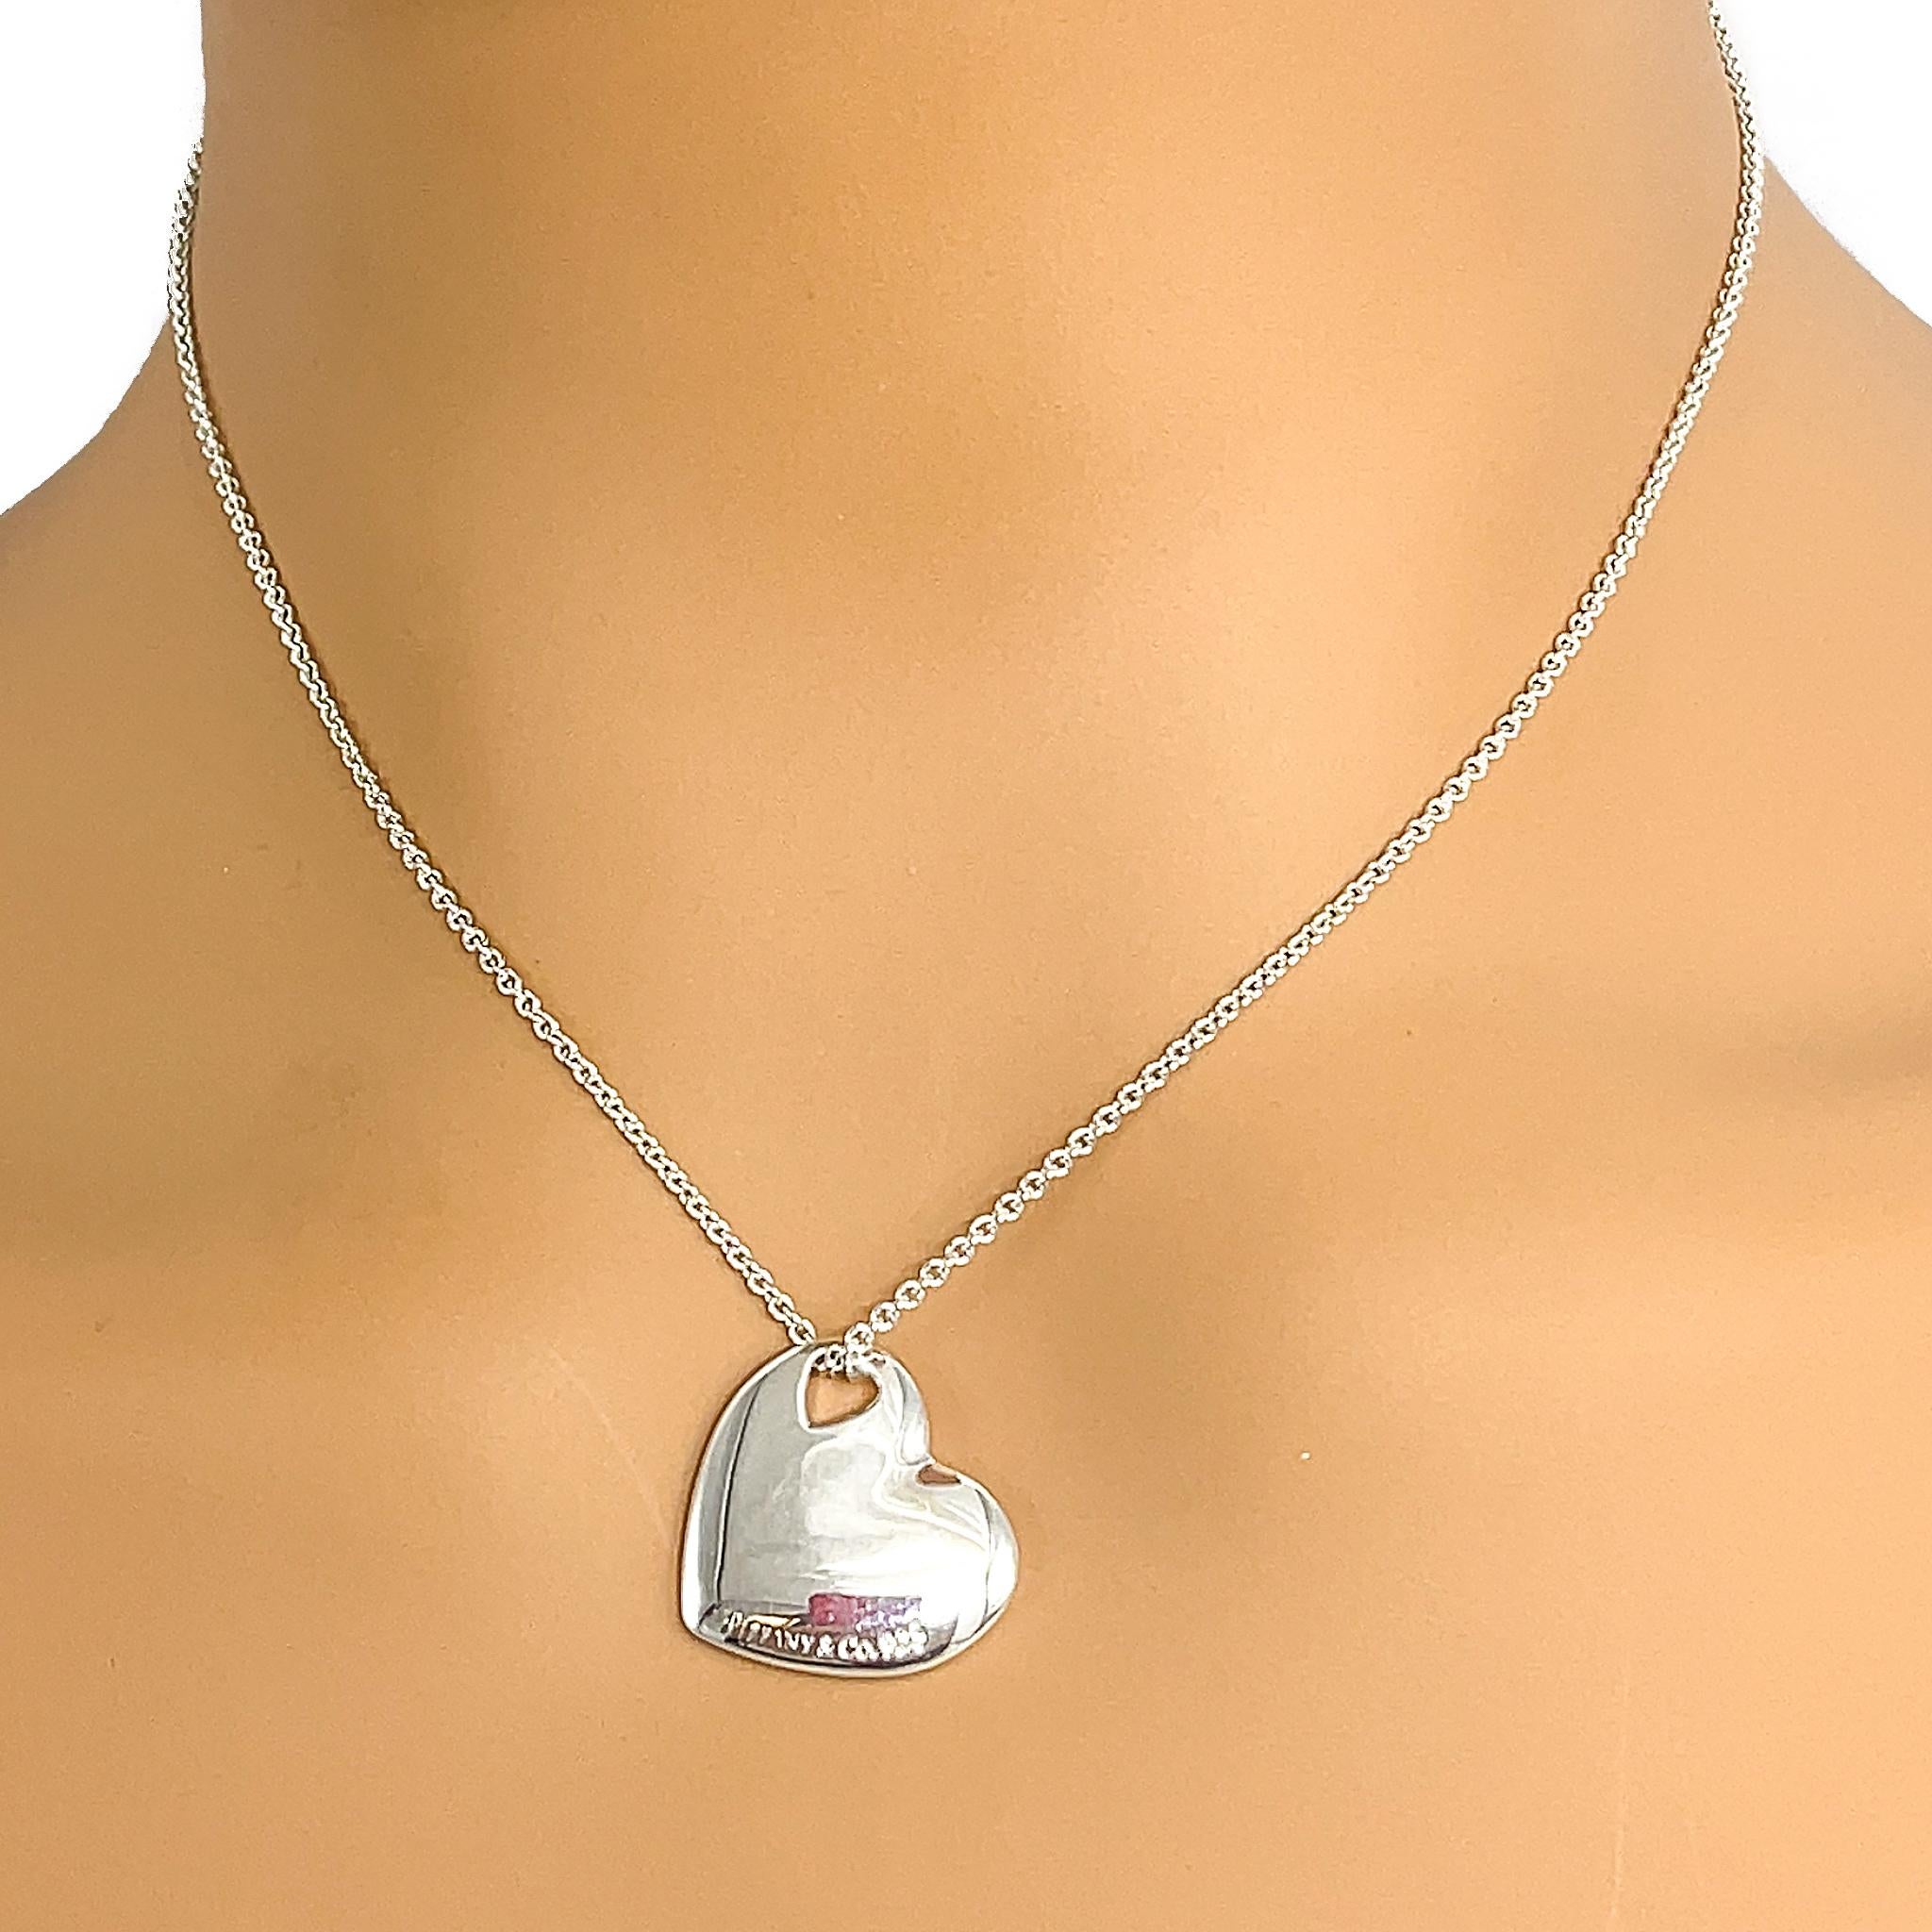 Tiffany and Co. Sterling Silver Cutout Heart Pendant Necklace For Sale 4